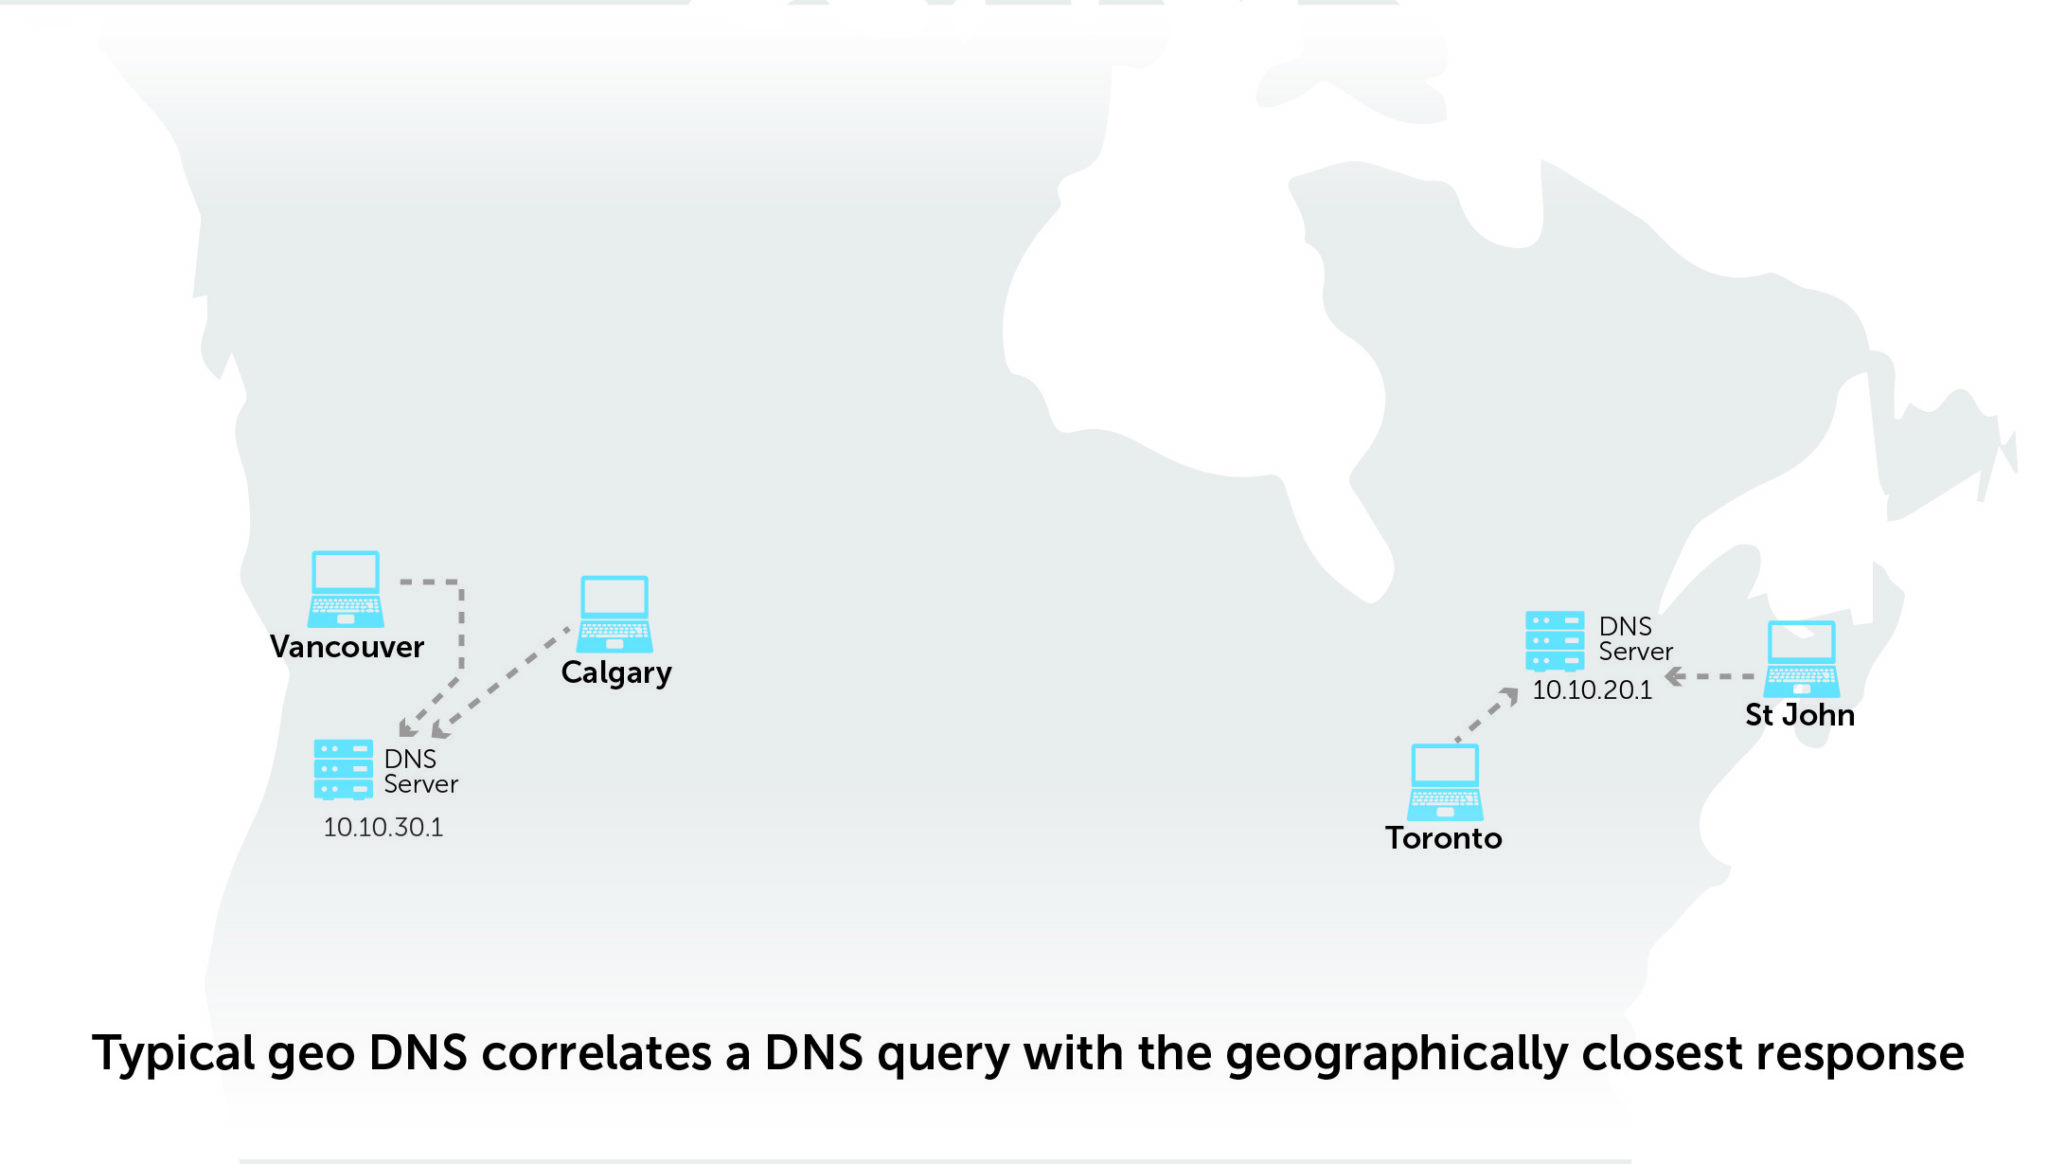 Typical geo DNS correlates a DNS query with the geographically closest response